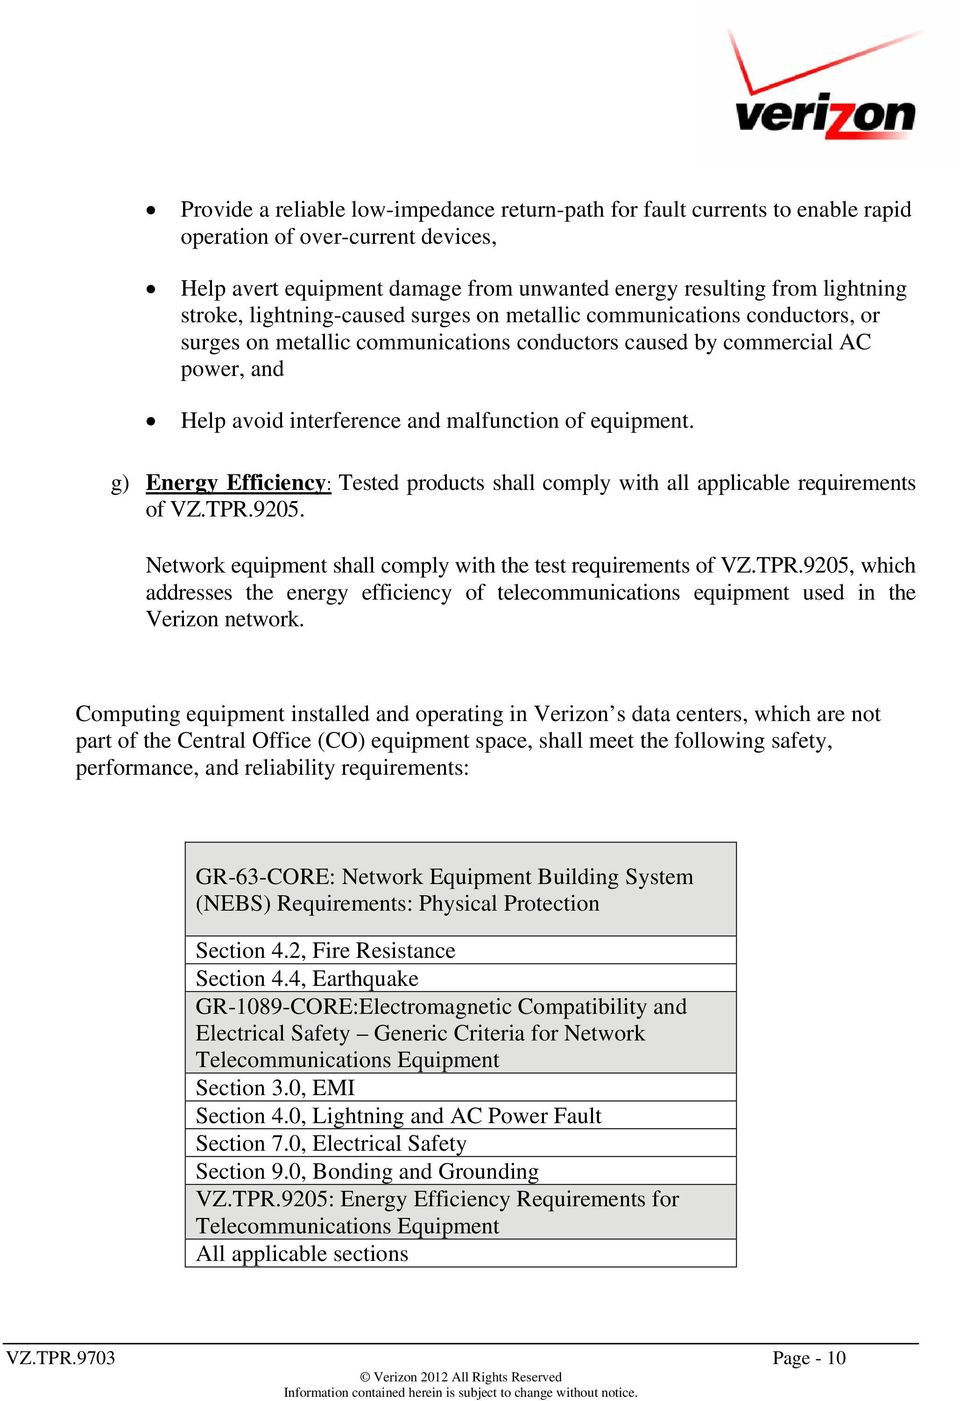 g) Energy Efficiency: Tested products shall comply with all applicable requirements of VZ.TPR.9205. Network equipment shall comply with the test requirements of VZ.TPR.9205, which addresses the energy efficiency of telecommunications equipment used in the Verizon network.